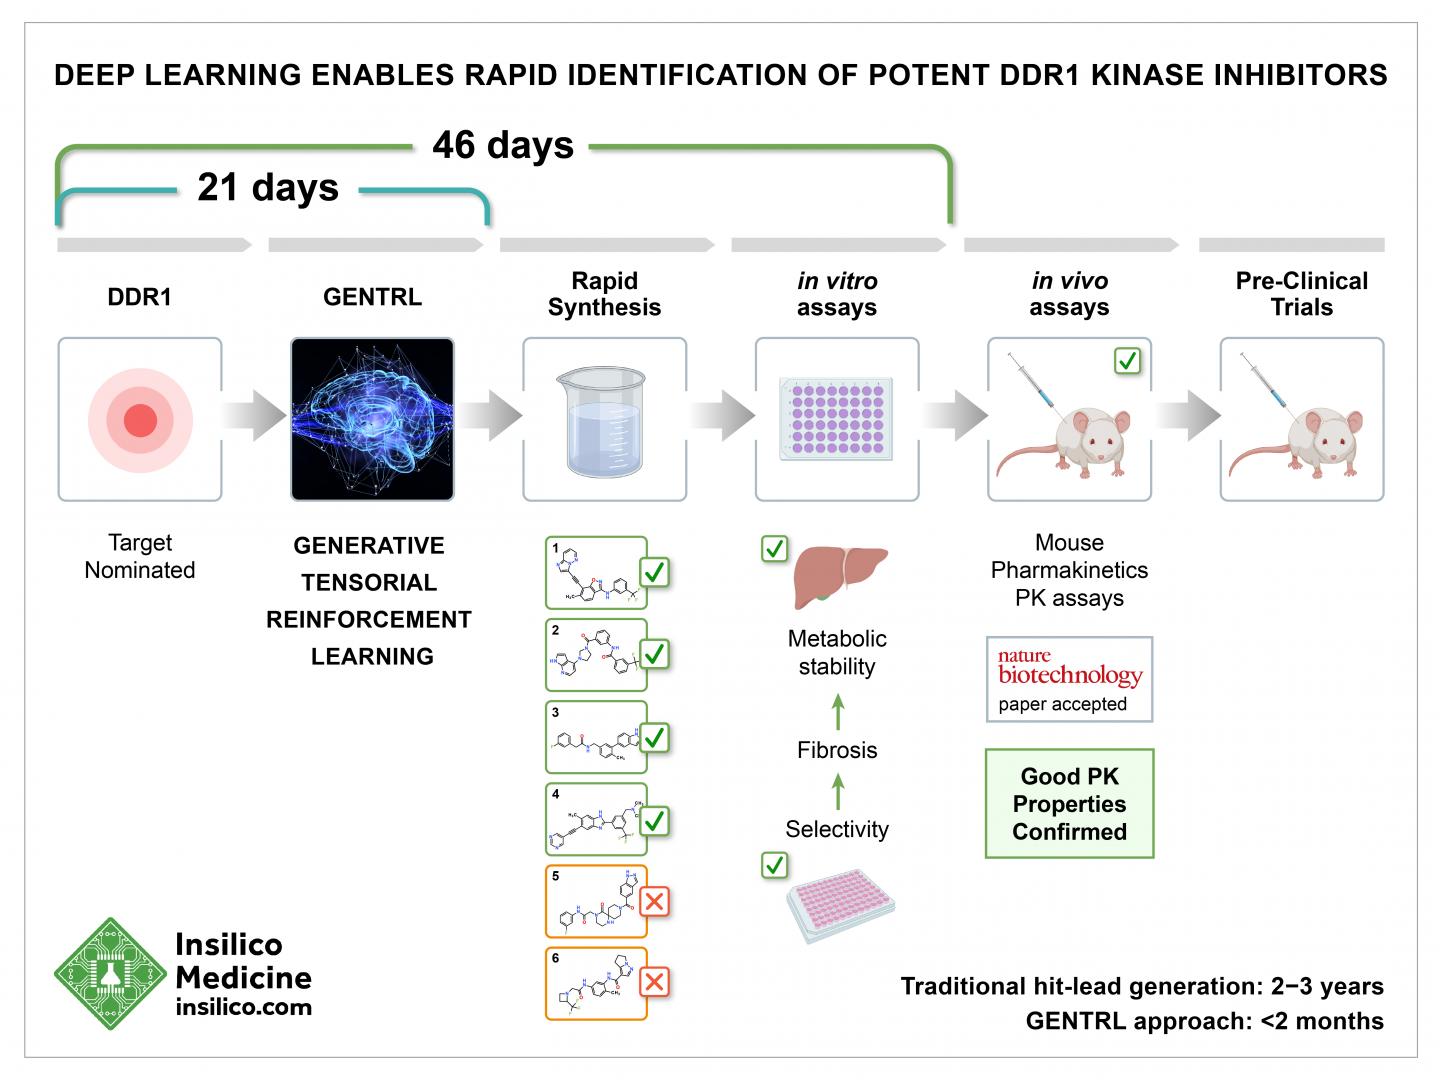 Deep Learning Enables Rapid Identification of Potent DDR1 Kinase Inhibitors